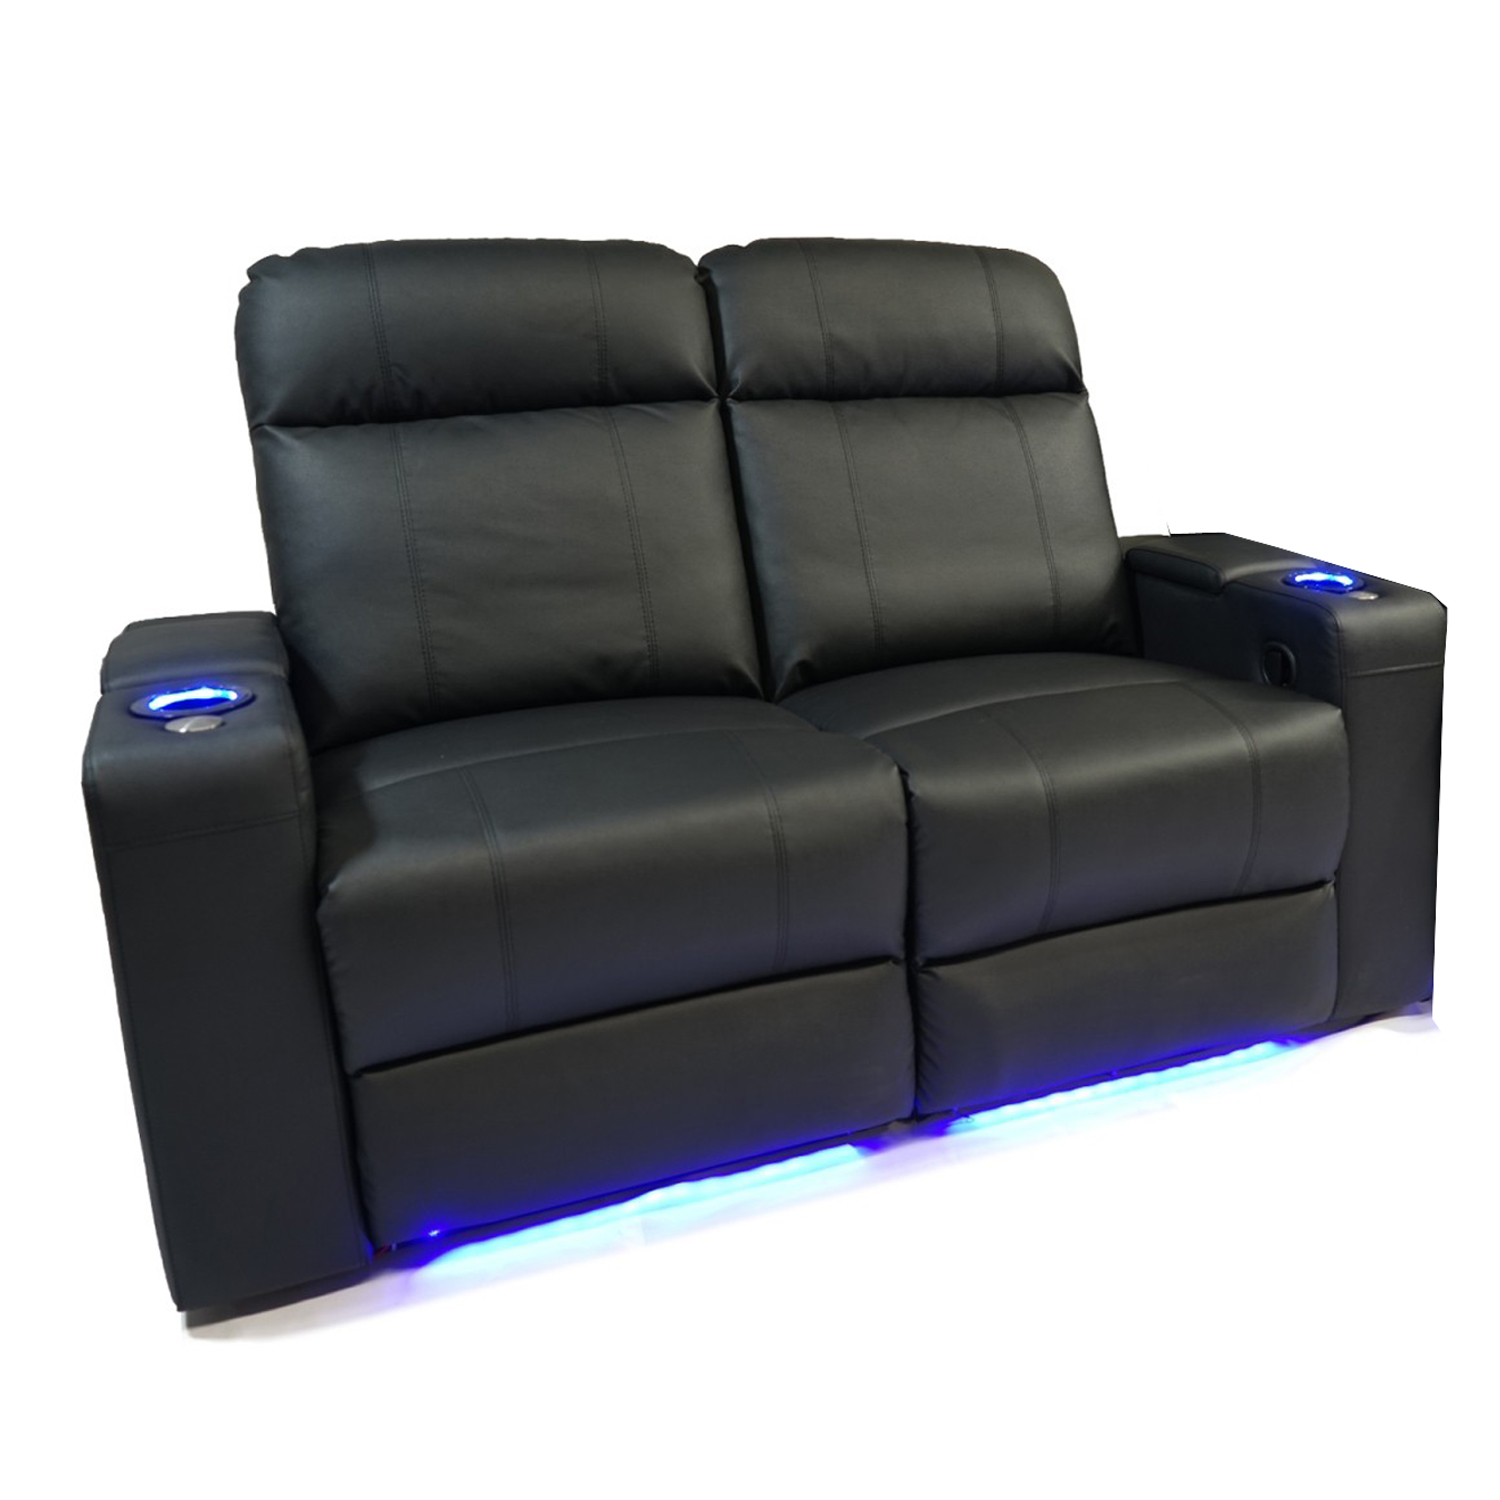 Valencia Piacenza Motorized Home Theater Seating - Top Grain Leather